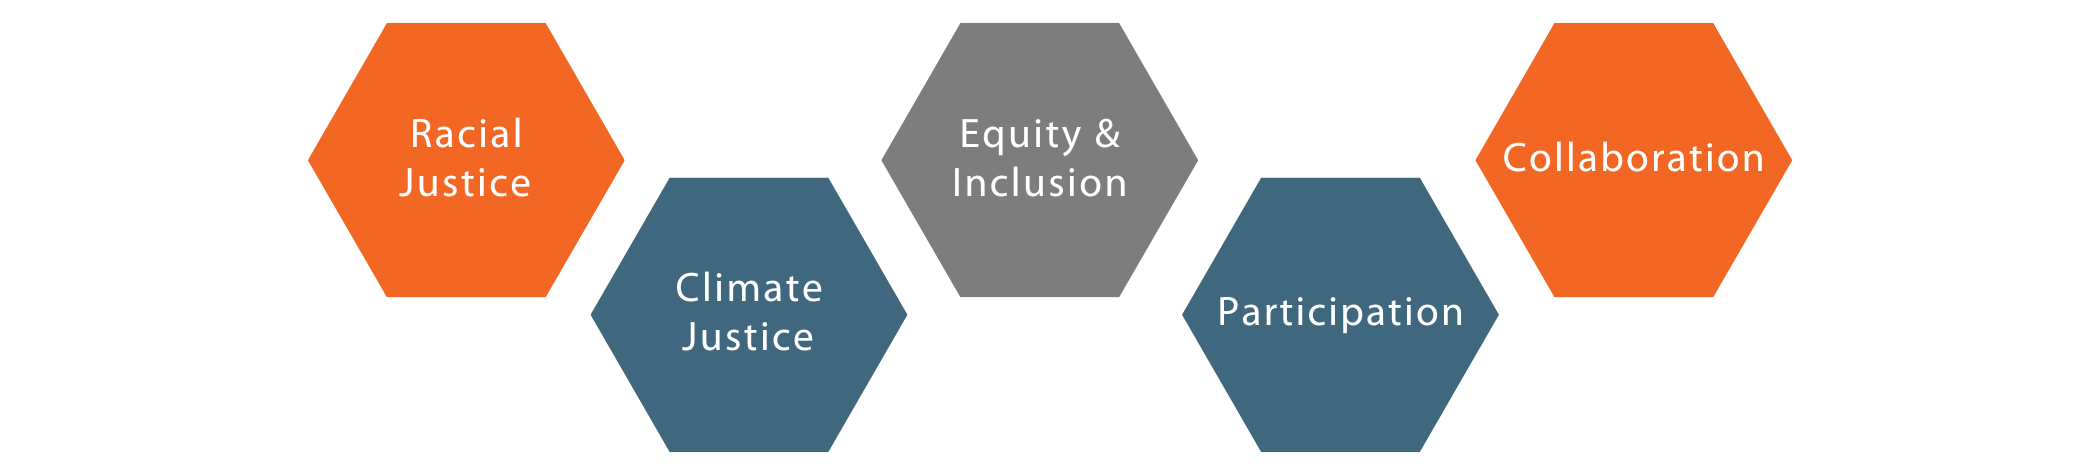 Racial Justice, Climate Justice, Equity & Inclusion, Participation, and Collaboration